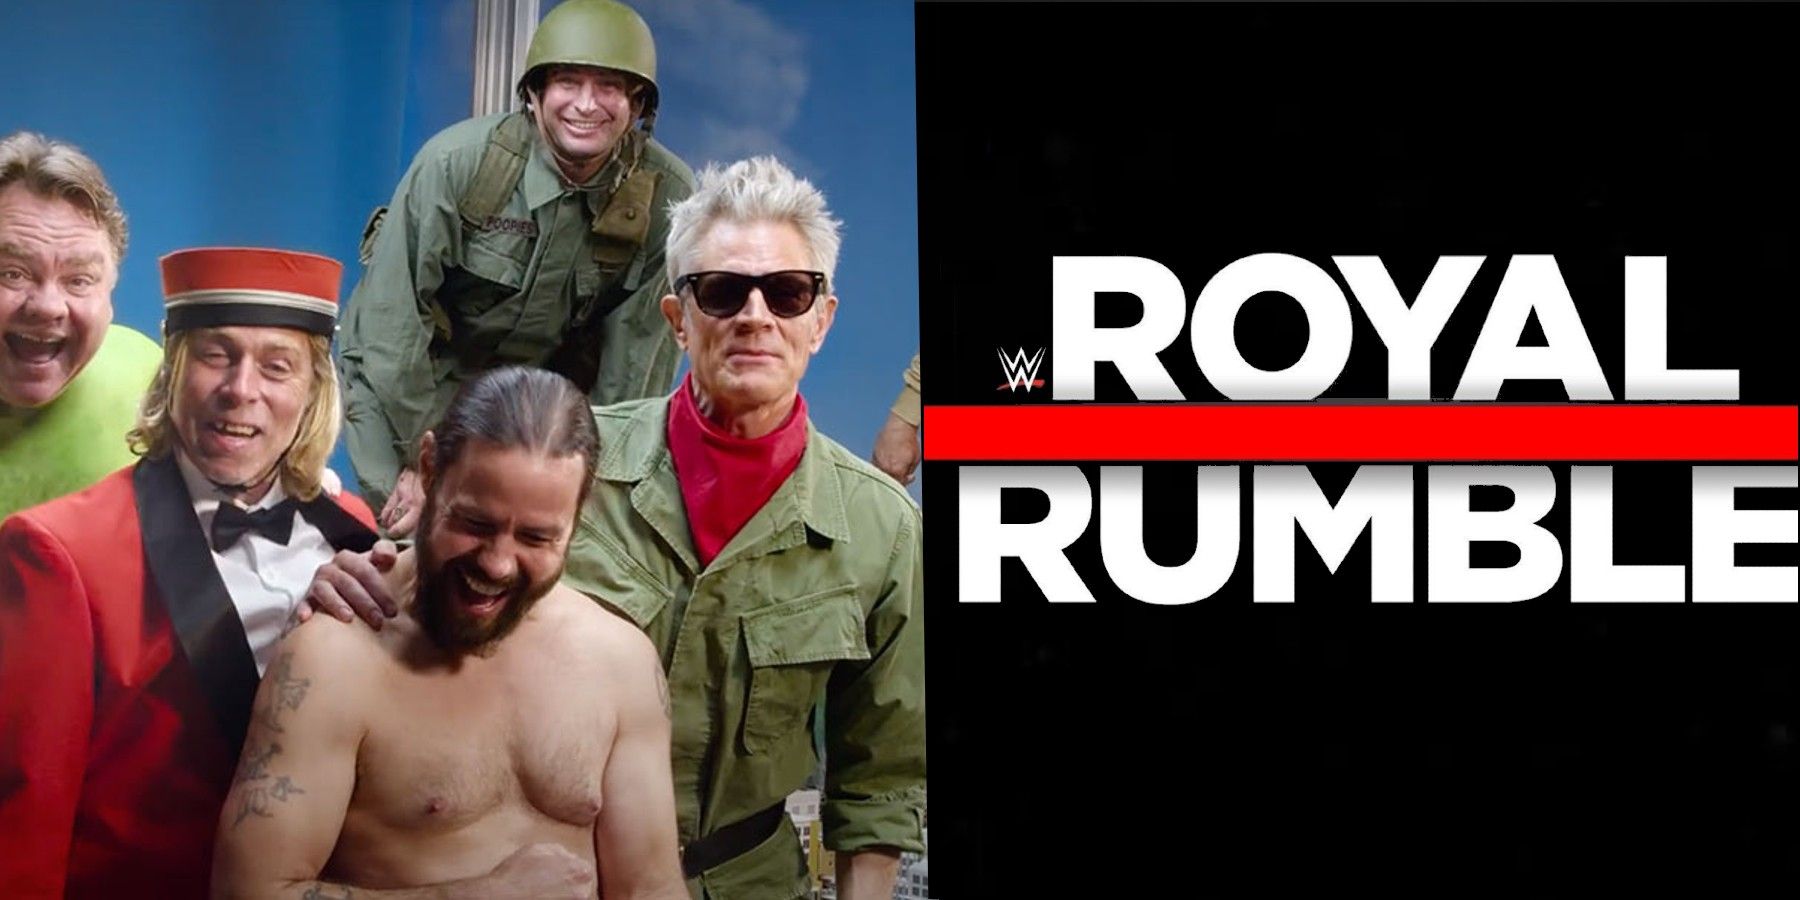 Johnny Knoxville To Enter WWE's Royal Rumble in 2022